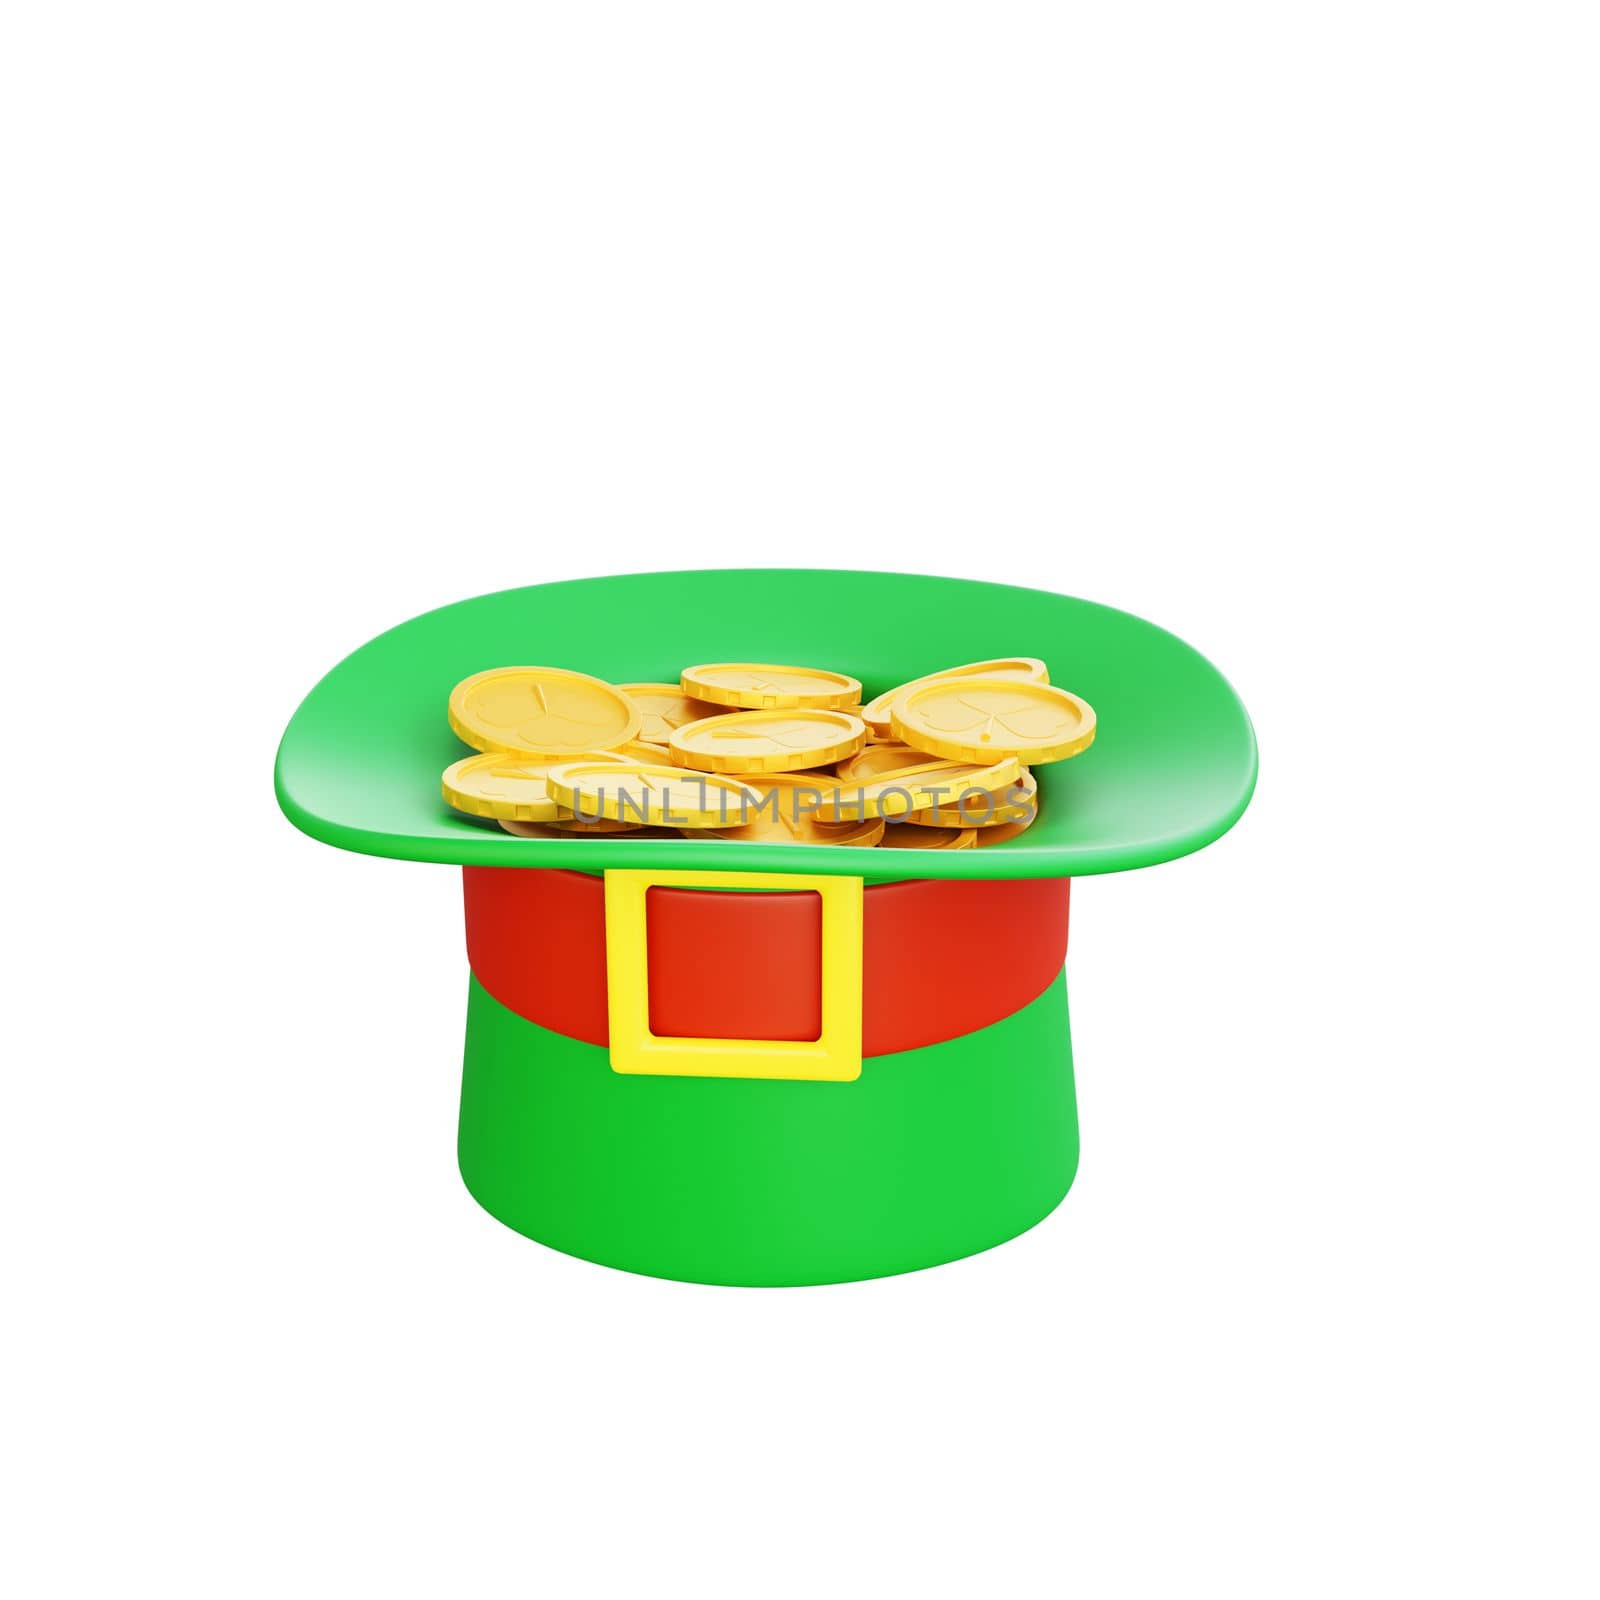 3d rendering of st patrick day hat with gold icon by Rahmat_Djayusman